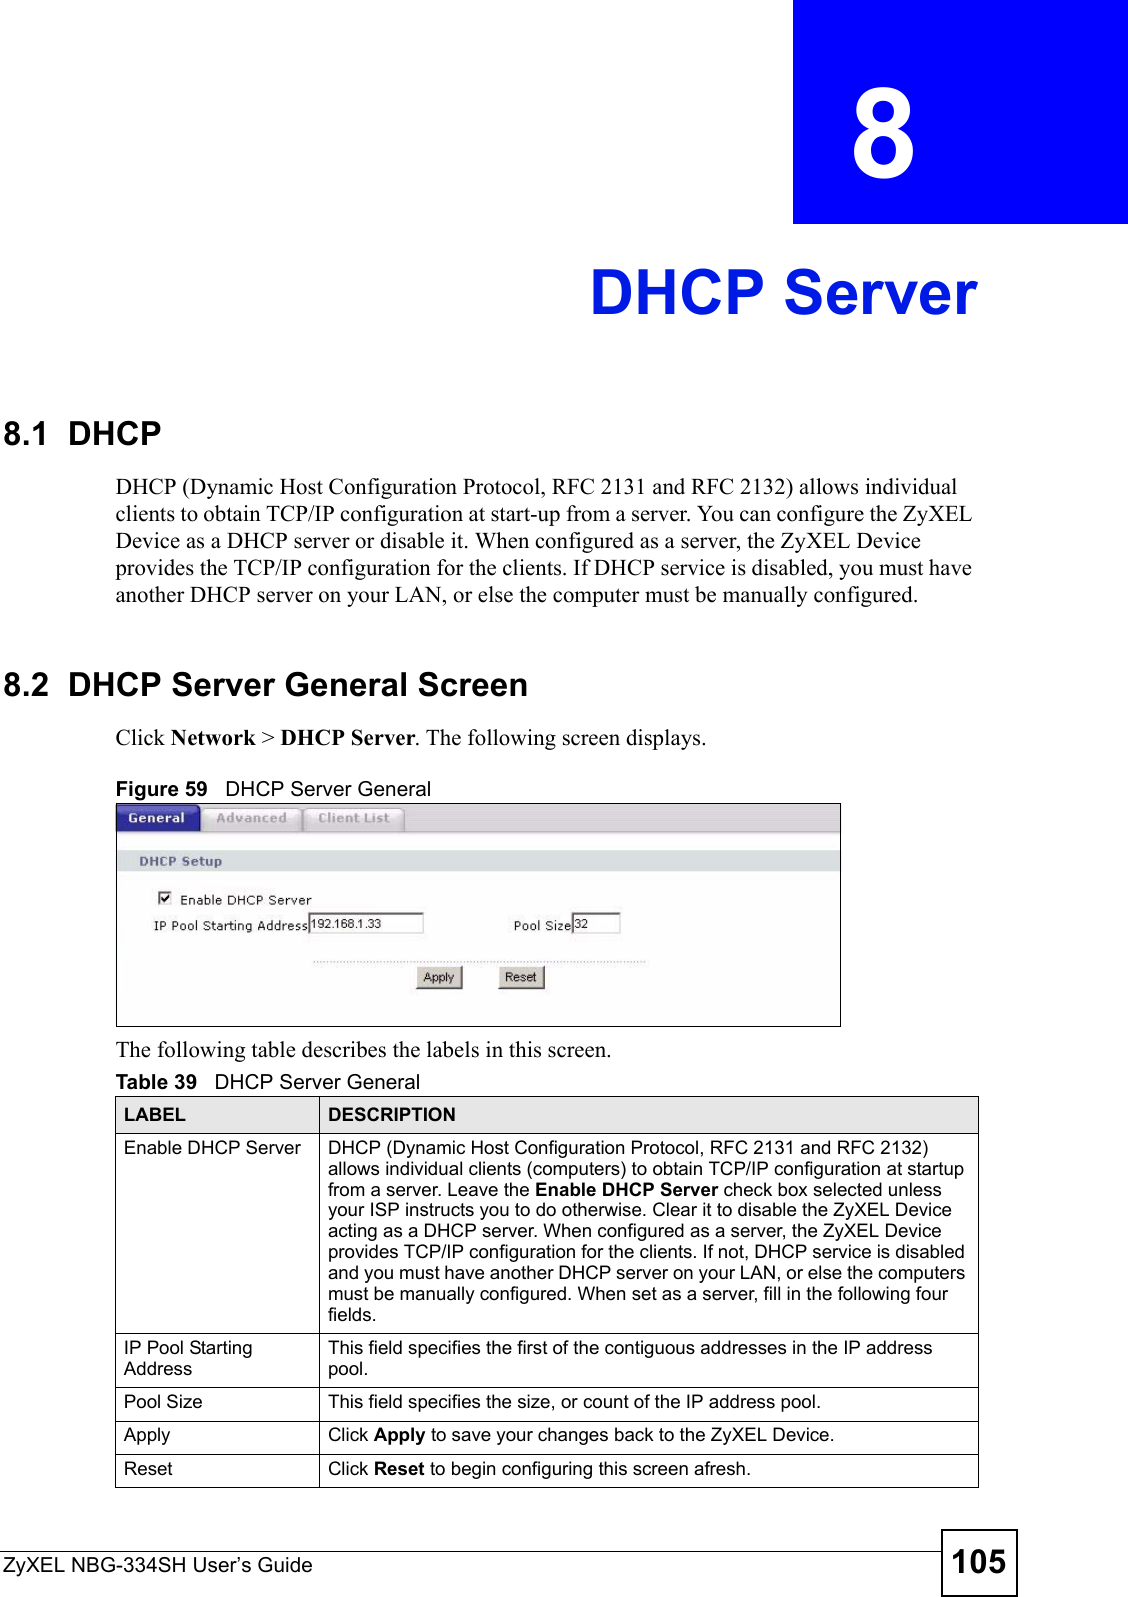 ZyXEL NBG-334SH User’s Guide 105CHAPTER  8 DHCP Server8.1  DHCPDHCP (Dynamic Host Configuration Protocol, RFC 2131 and RFC 2132) allows individual clients to obtain TCP/IP configuration at start-up from a server. You can configure the ZyXEL Device as a DHCP server or disable it. When configured as a server, the ZyXEL Device provides the TCP/IP configuration for the clients. If DHCP service is disabled, you must have another DHCP server on your LAN, or else the computer must be manually configured.8.2  DHCP Server General ScreenClick Network &gt; DHCP Server. The following screen displays.Figure 59   DHCP Server GeneralThe following table describes the labels in this screen.Table 39   DHCP Server GeneralLABEL DESCRIPTIONEnable DHCP Server DHCP (Dynamic Host Configuration Protocol, RFC 2131 and RFC 2132) allows individual clients (computers) to obtain TCP/IP configuration at startup from a server. Leave the Enable DHCP Server check box selected unless your ISP instructs you to do otherwise. Clear it to disable the ZyXEL Device acting as a DHCP server. When configured as a server, the ZyXEL Device provides TCP/IP configuration for the clients. If not, DHCP service is disabled and you must have another DHCP server on your LAN, or else the computers must be manually configured. When set as a server, fill in the following four fields.IP Pool Starting AddressThis field specifies the first of the contiguous addresses in the IP address pool.Pool Size This field specifies the size, or count of the IP address pool.Apply Click Apply to save your changes back to the ZyXEL Device.Reset Click Reset to begin configuring this screen afresh.